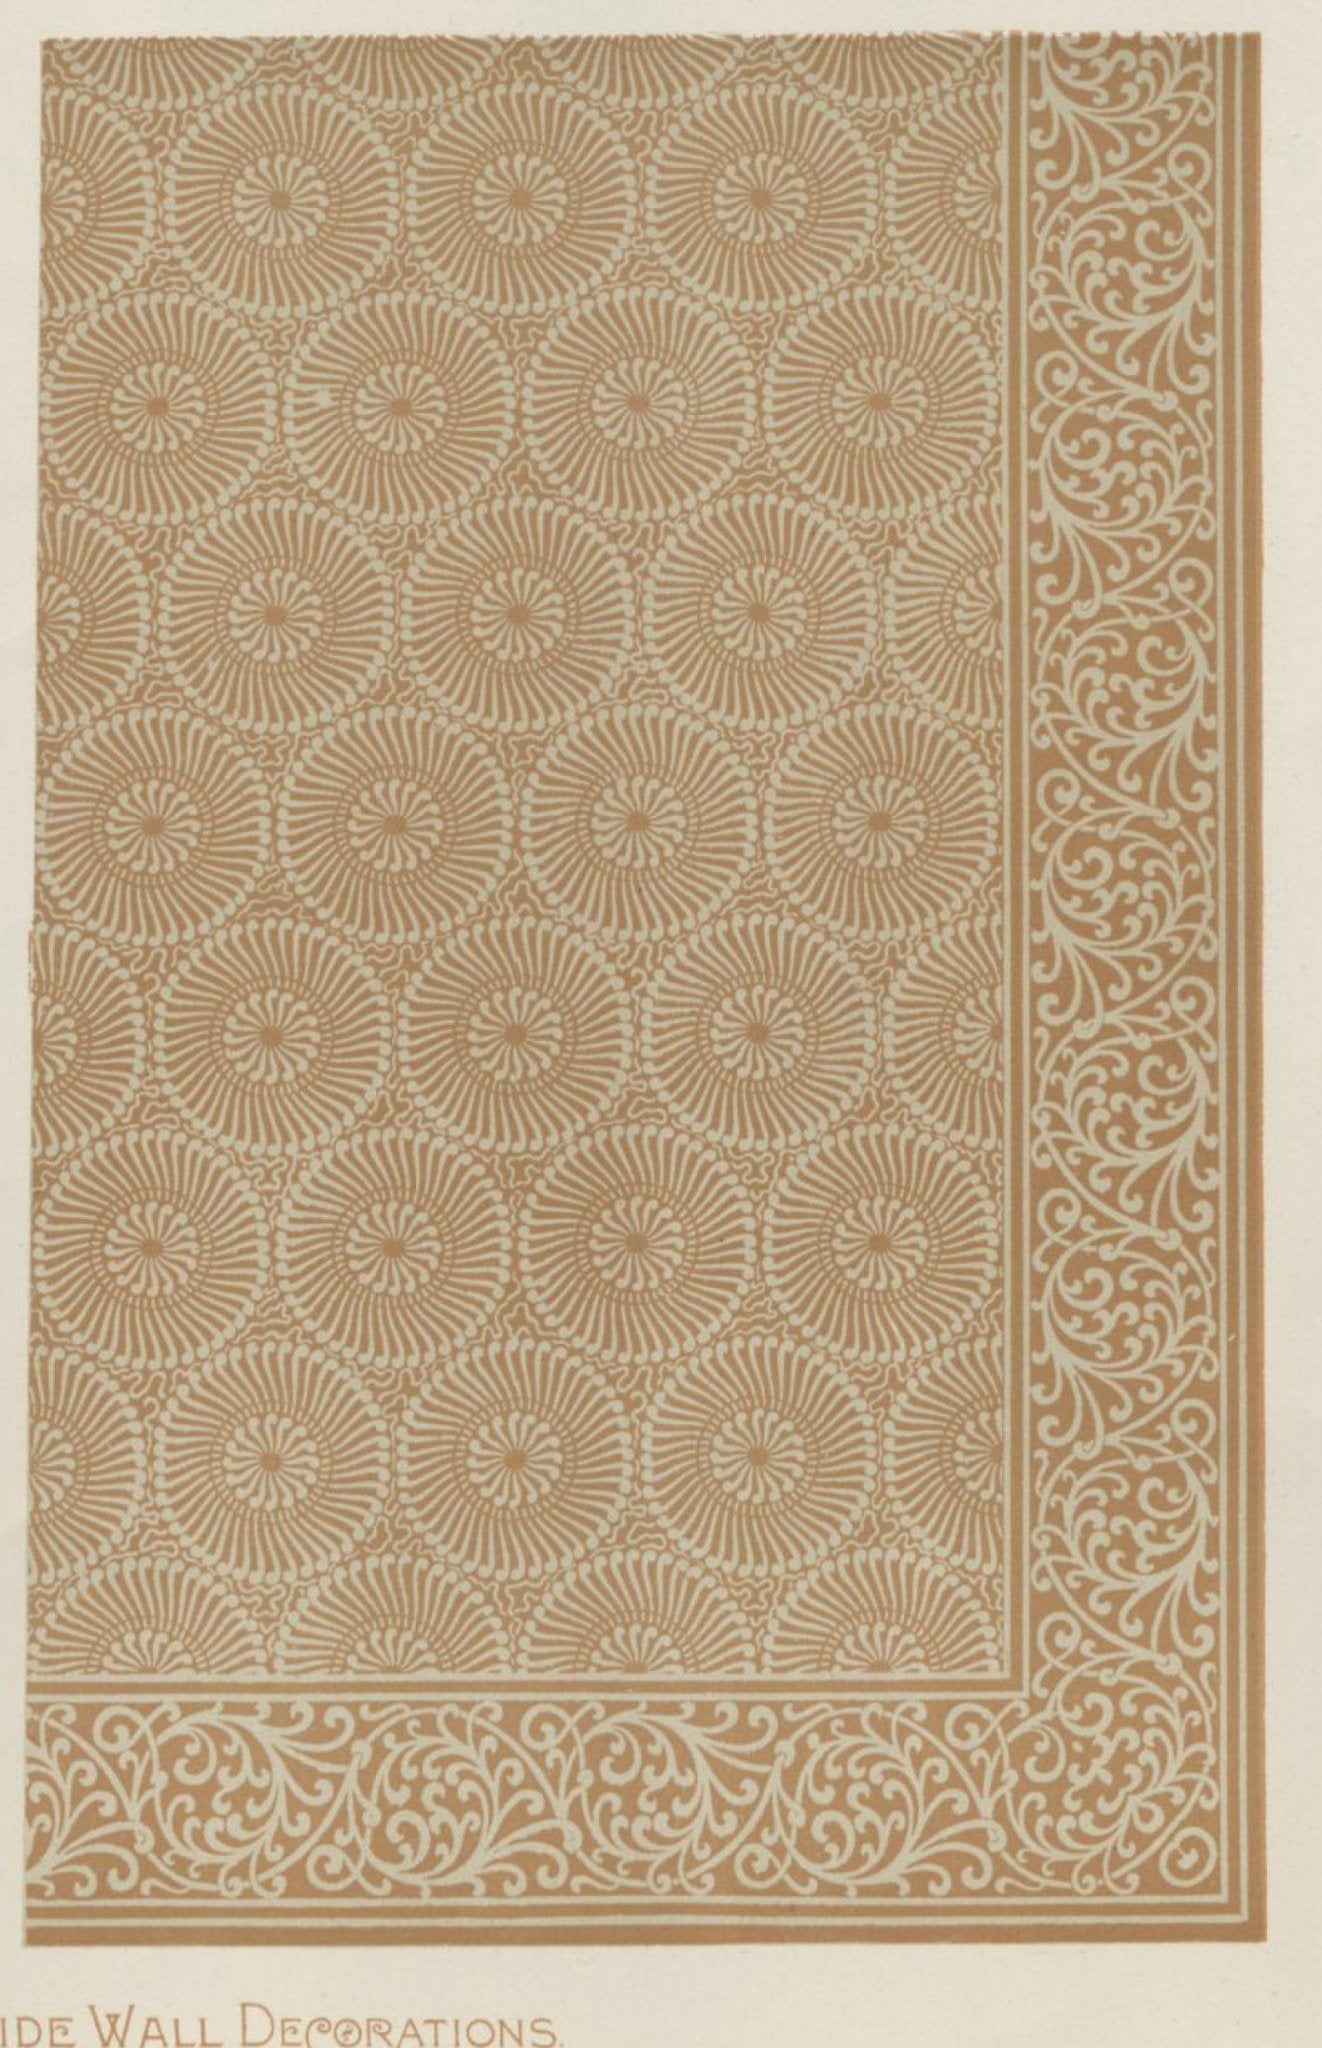 An image of the catalog page showing the border pattern for this floorcloth - Robert Graves Co. c. 1889.